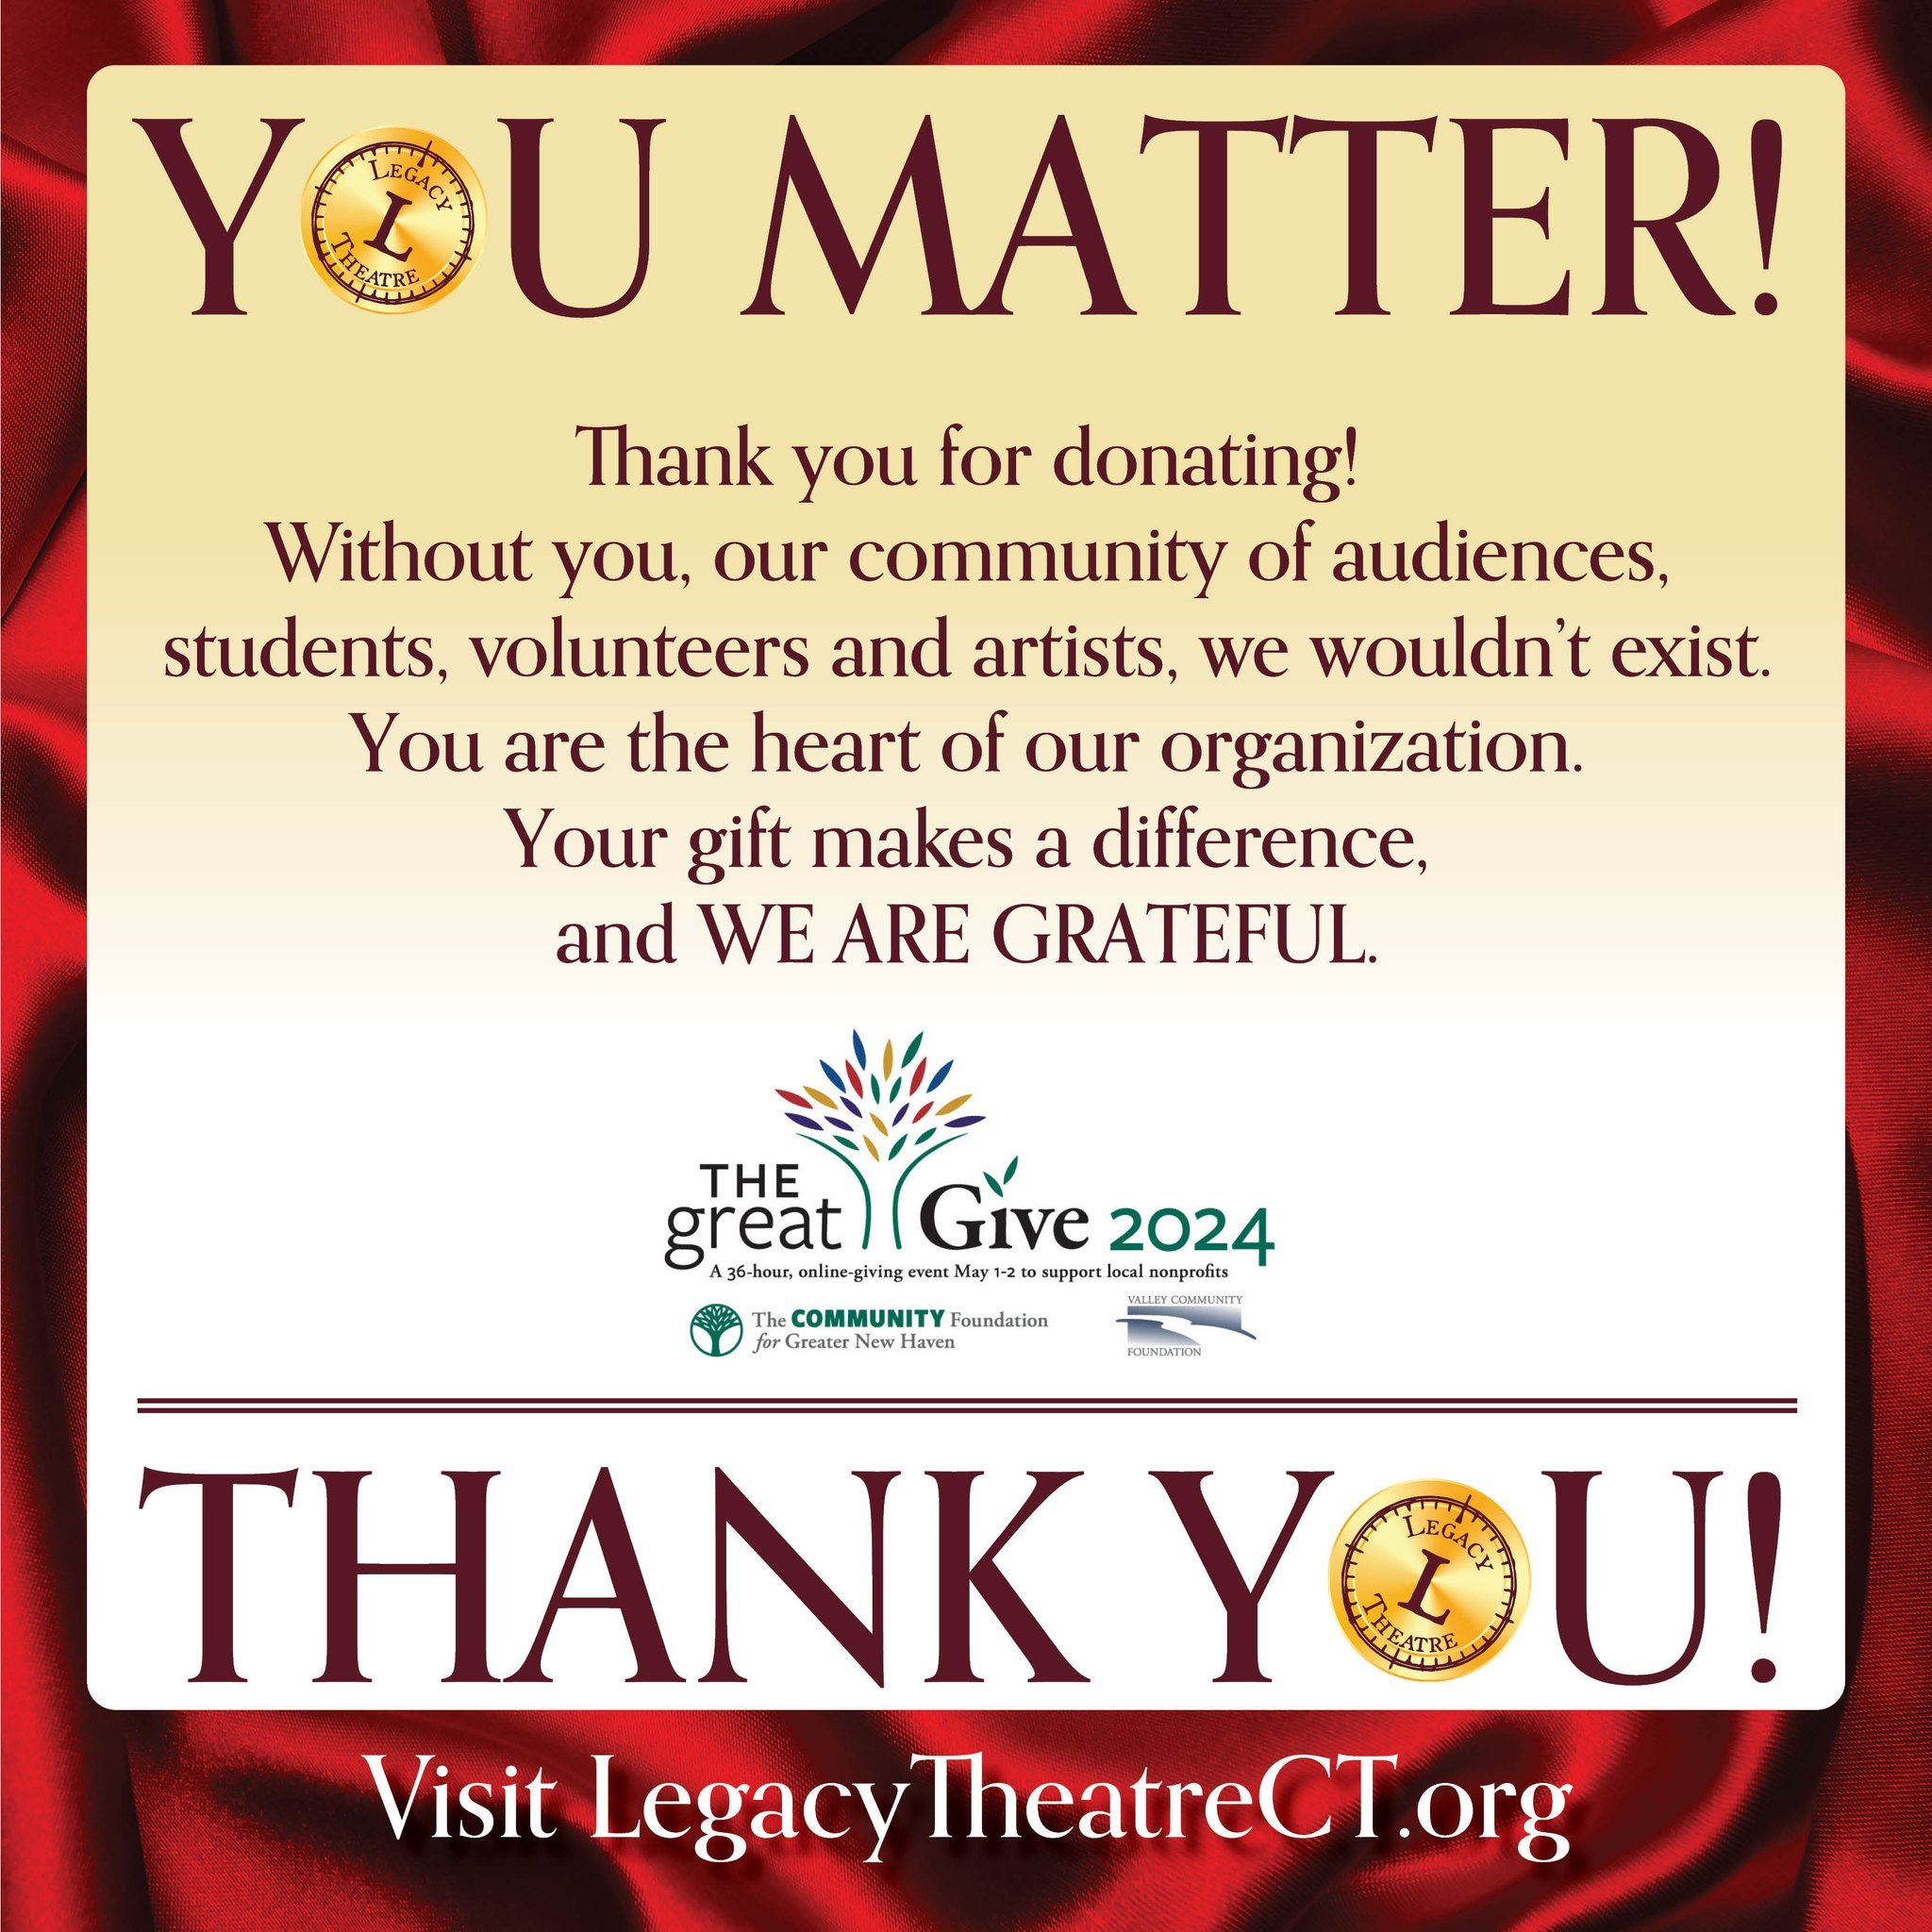 Thank you so much for all of your support during The Great Give! Your generosity supports live performing arts right here in our community, and we could not do what we do without you! With your help, we raised over $14,000 for Legacy programming, fro